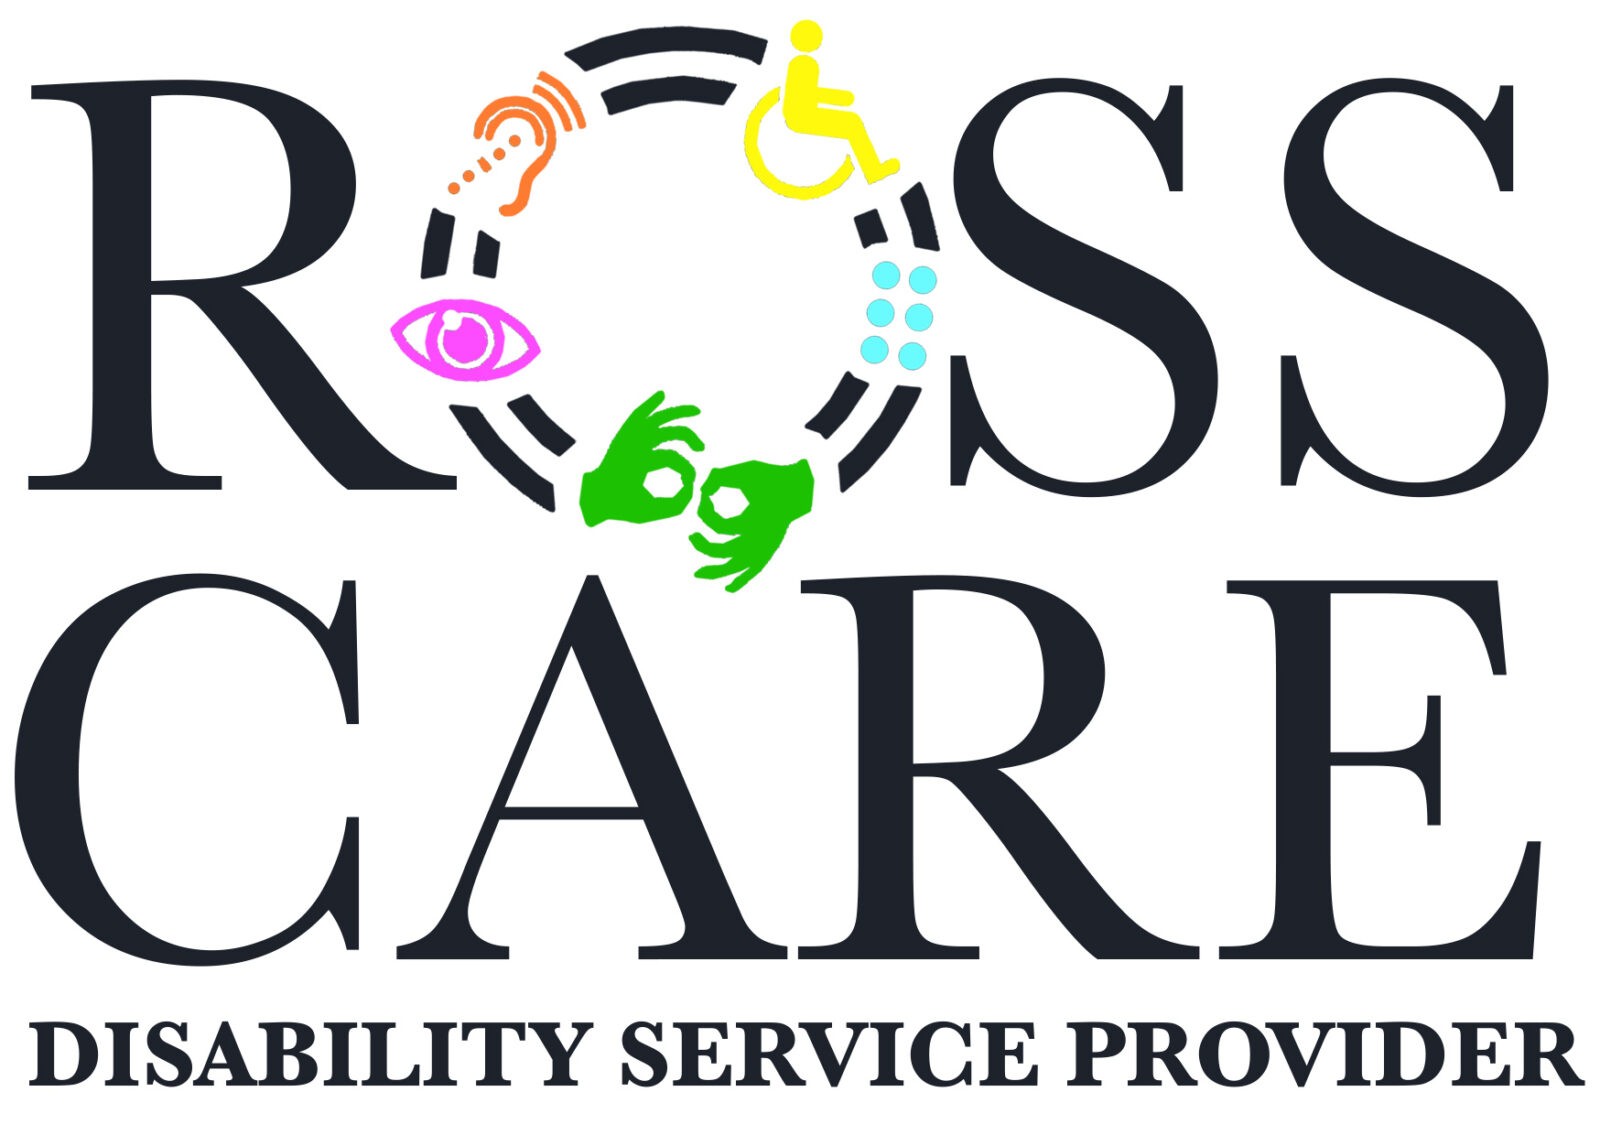 Ross Care Disability Service Provider